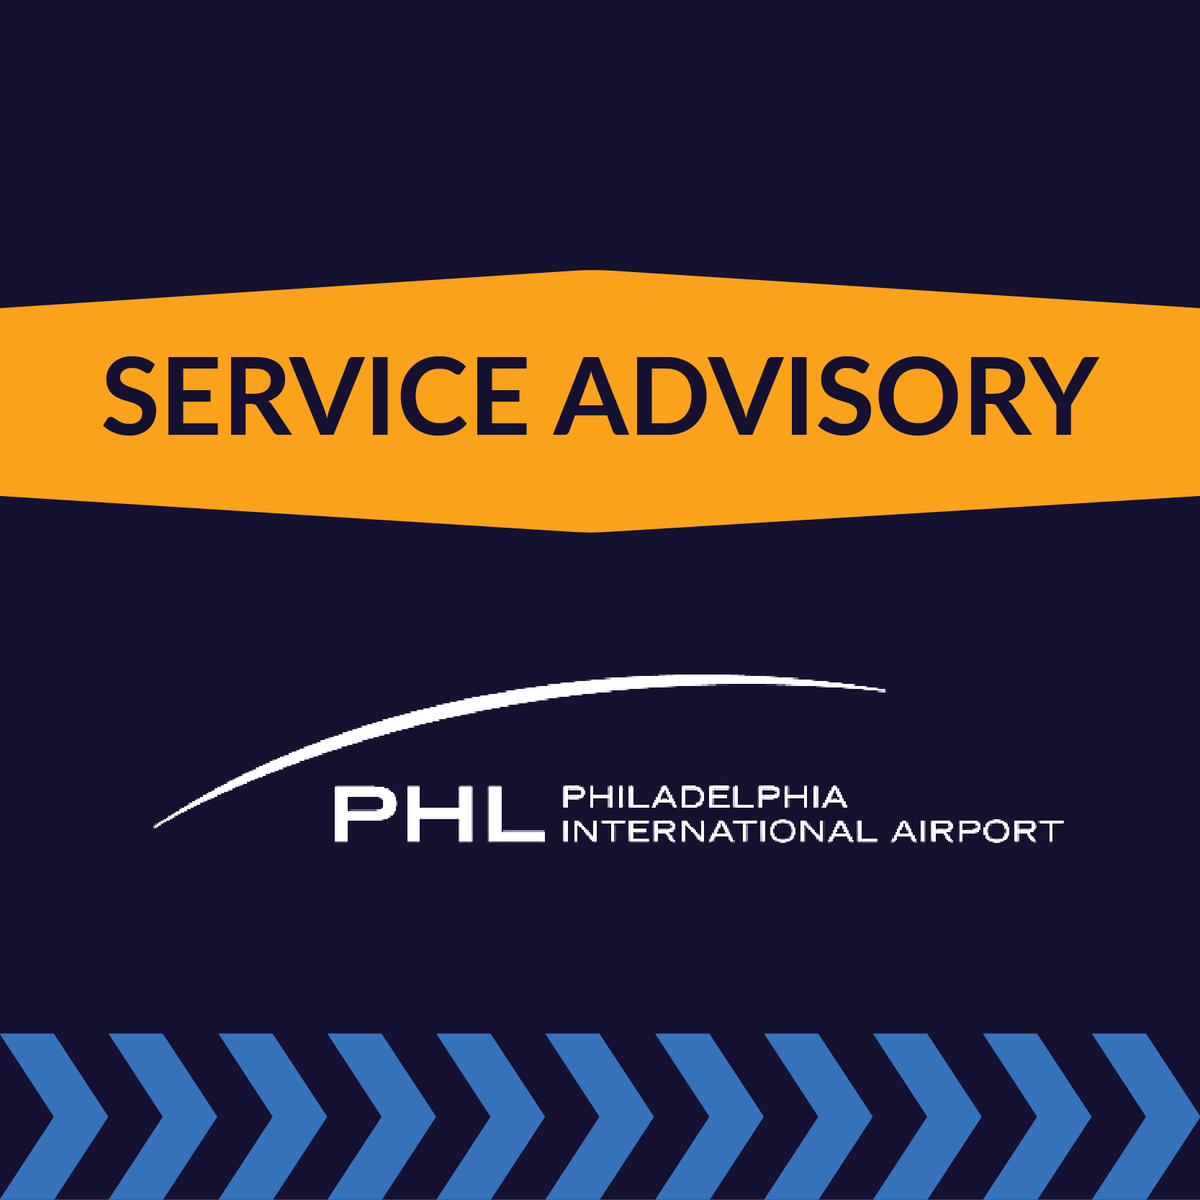 Traveling through PHL on Monday evening? After 7:30 pm, some food and beverage outlets be closed due to scheduled infrastructure maintenance. Click here to see the list of open options. @phlfoodandshops ow.ly/TlFT50QgWy6